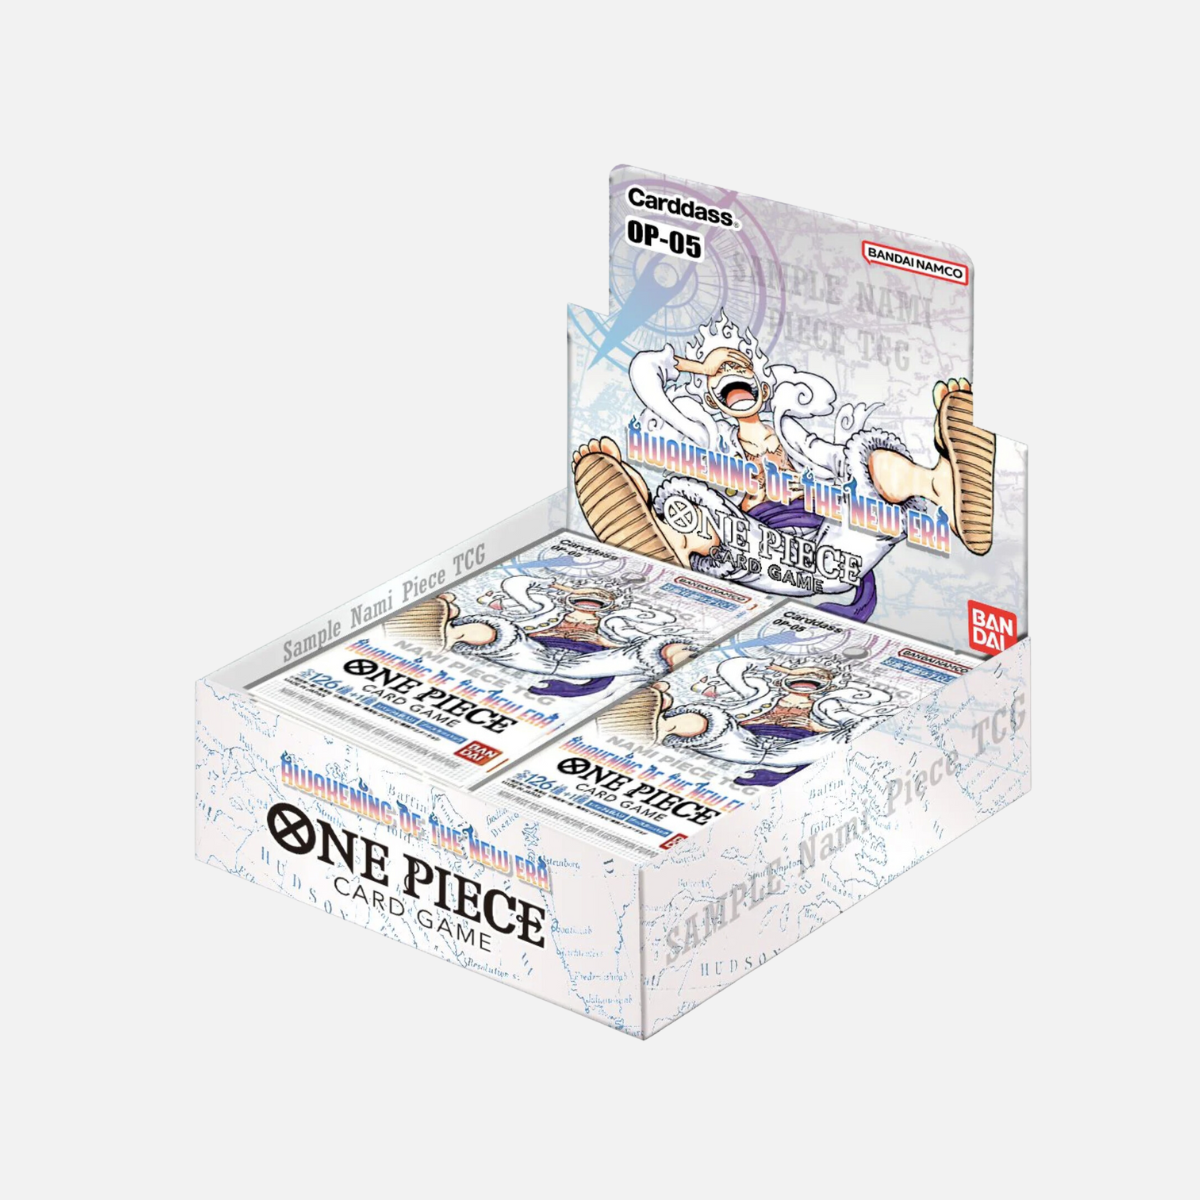 One Piece card game booster box